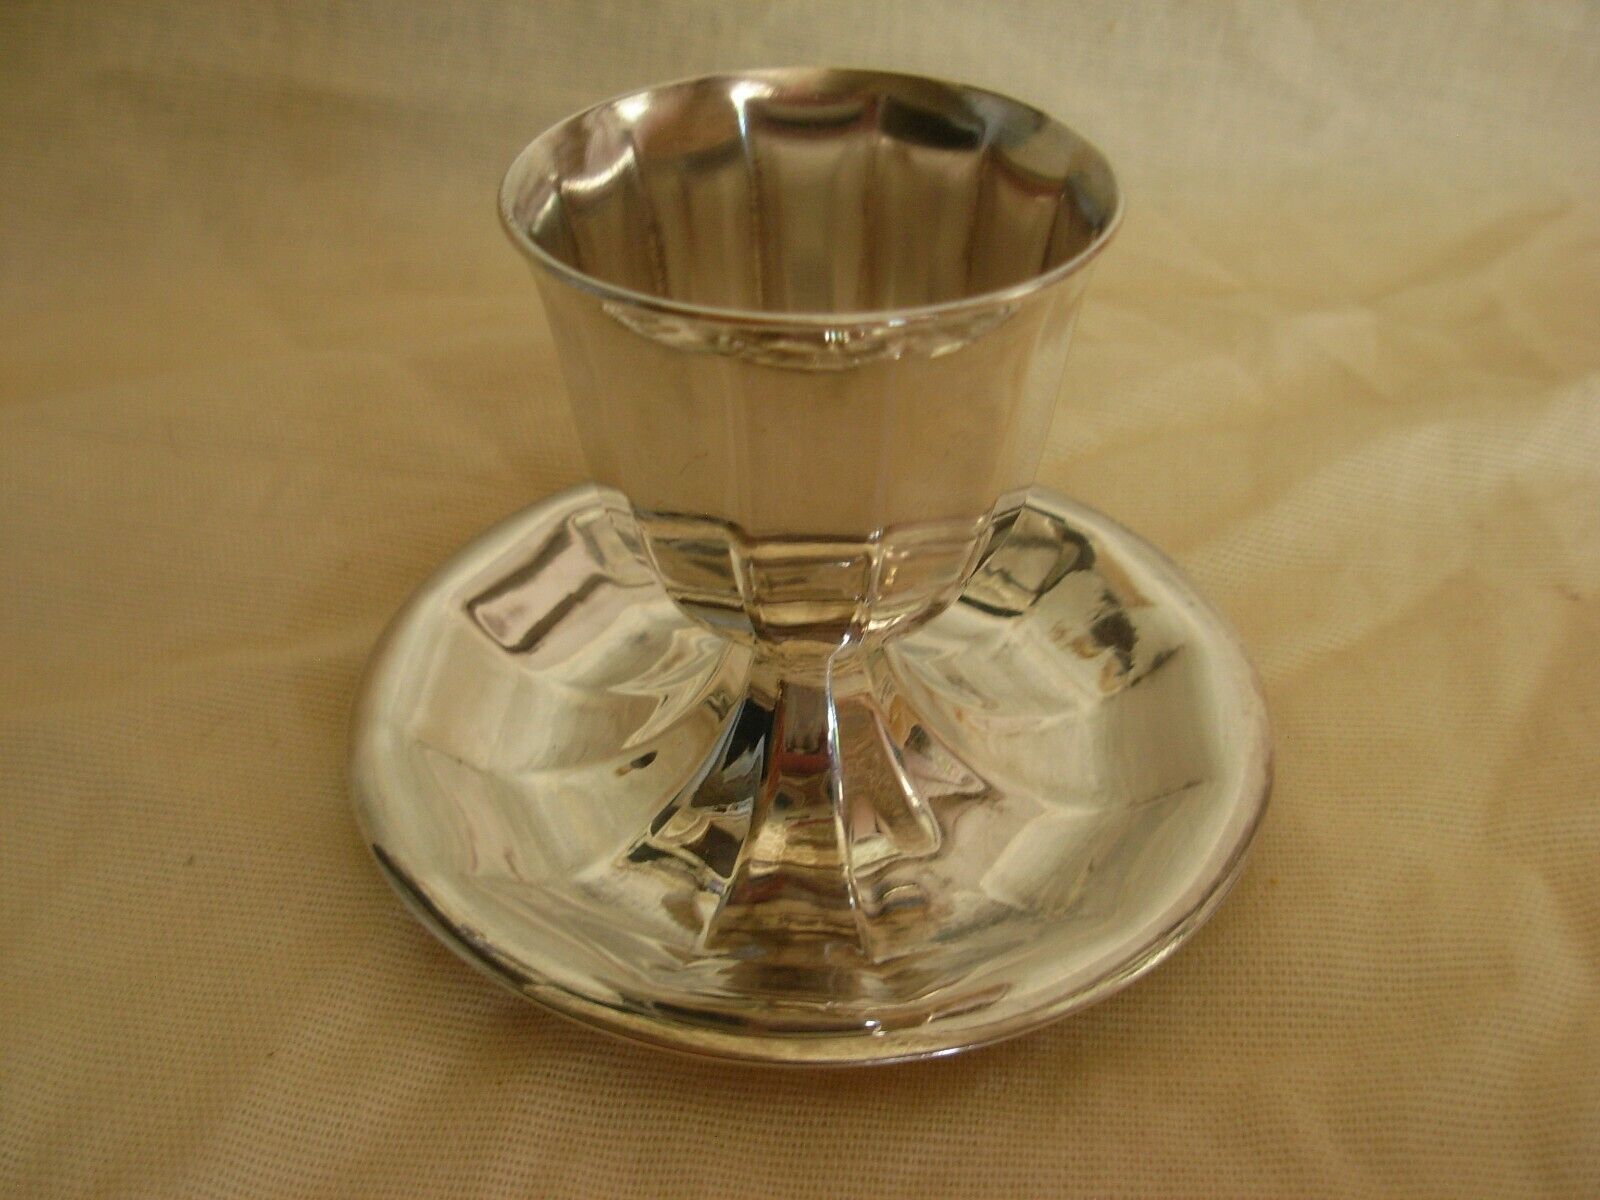 CHRISTOFLE,FRENCH ART DECO SILVERPLATED EGG CUP,1930s YEARS.